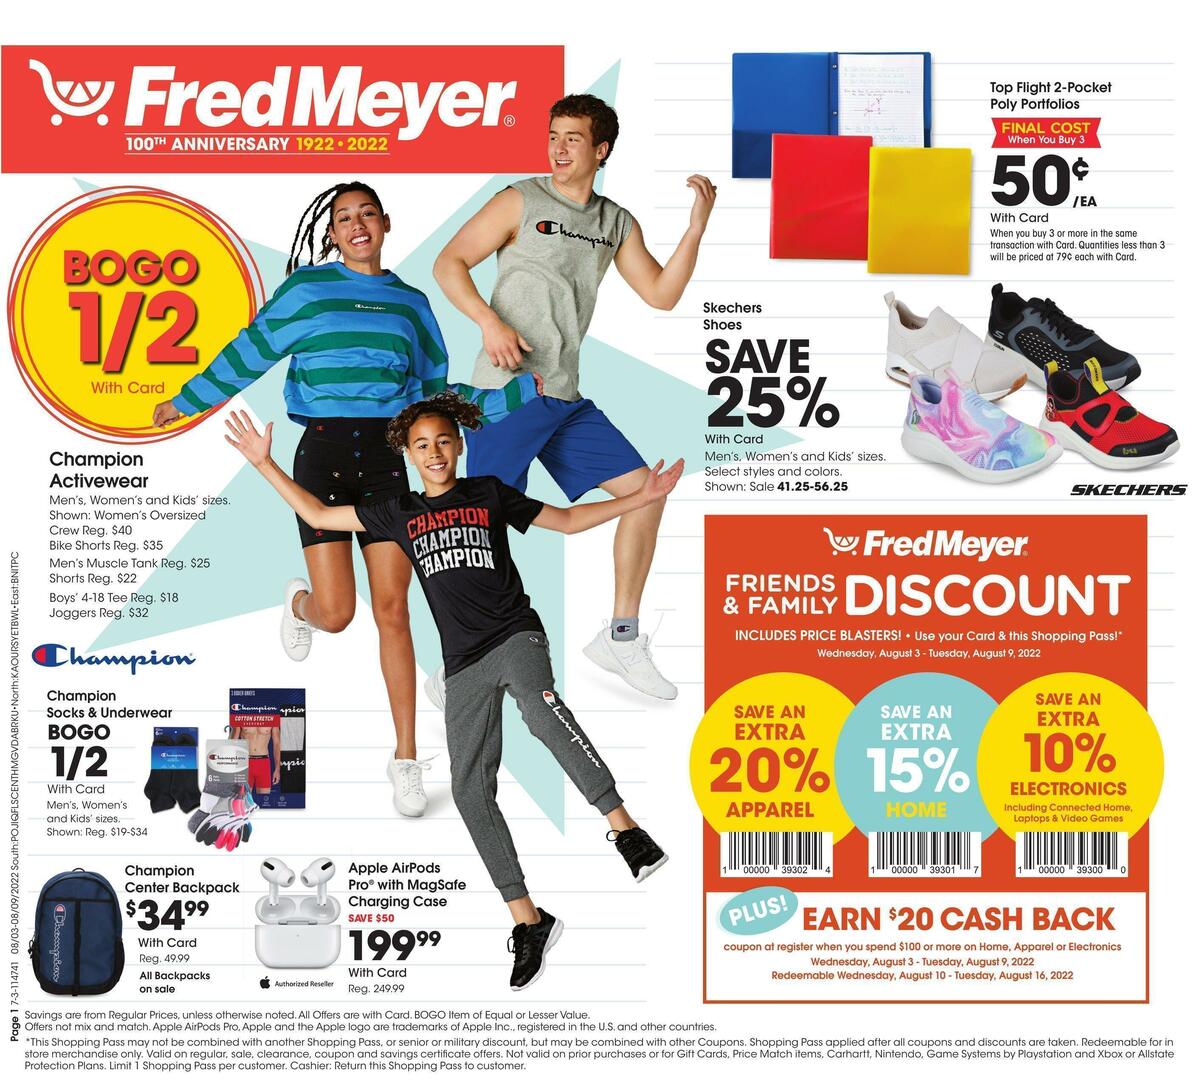 Fred Meyer General Merchandise Weekly Ad from August 3